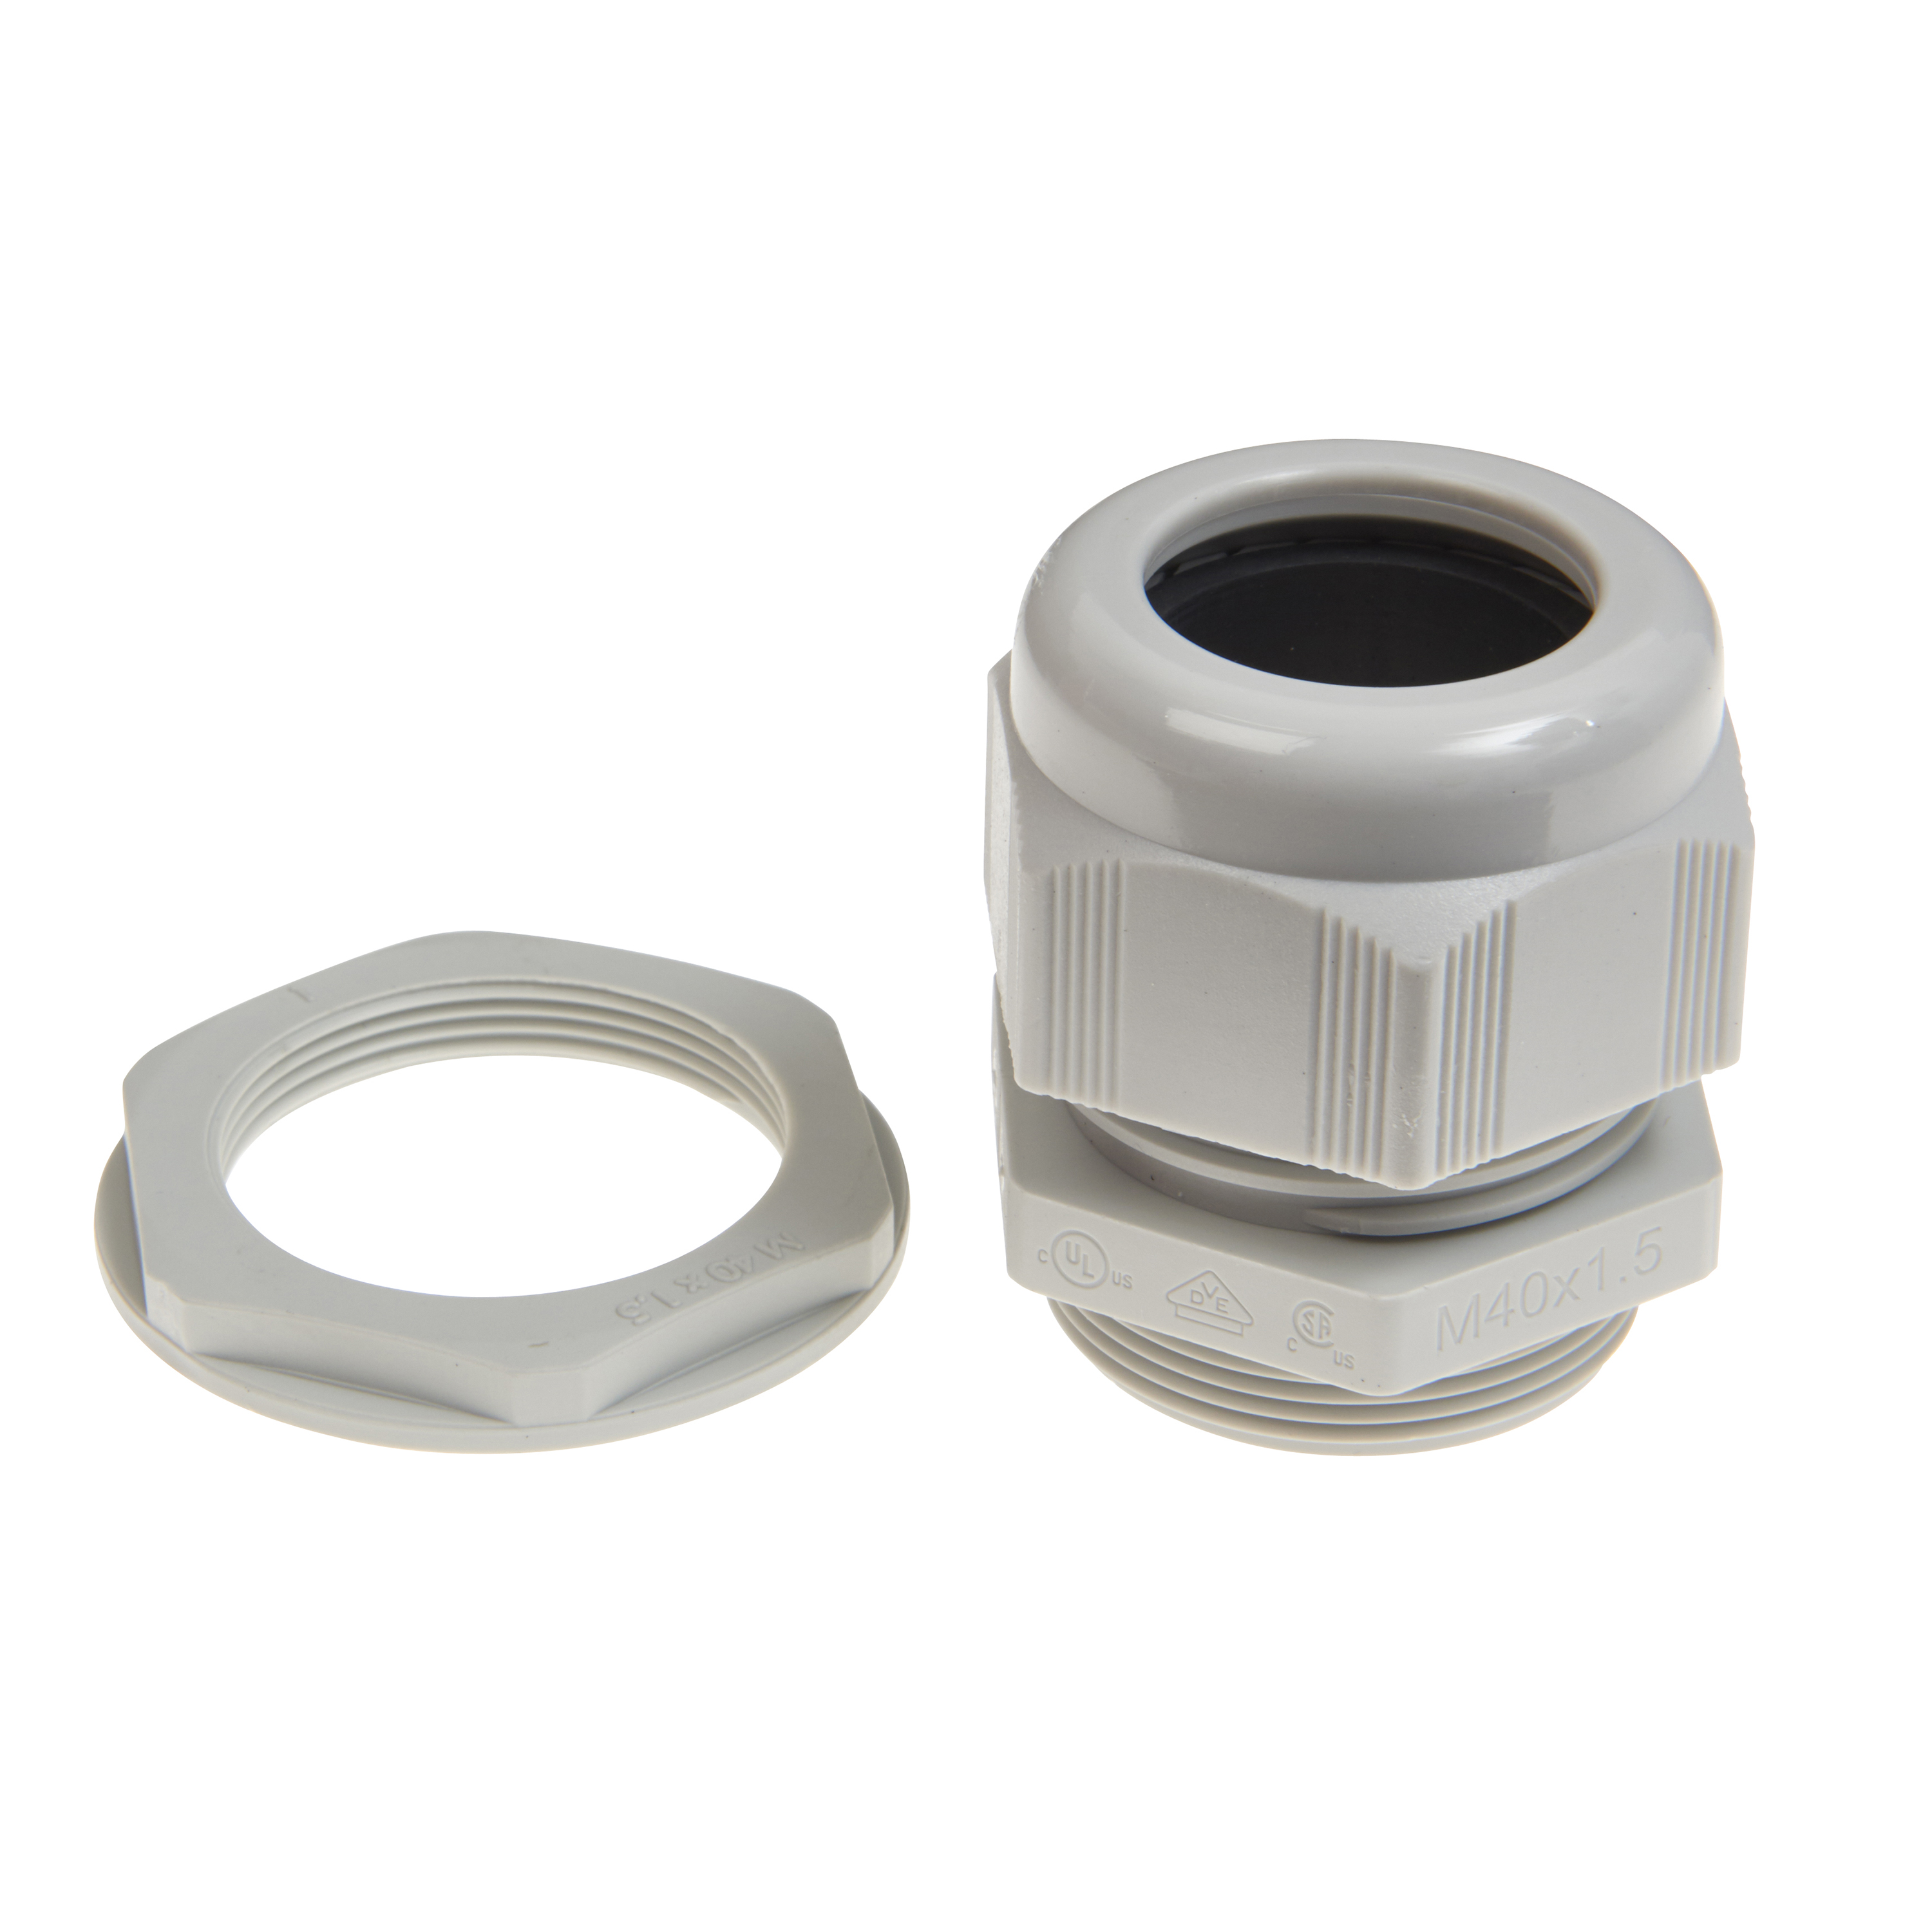 Schneider Electric ISM7 Series Cable Gland, M25 Thread, 17mm Min, 11mm Max, IP68